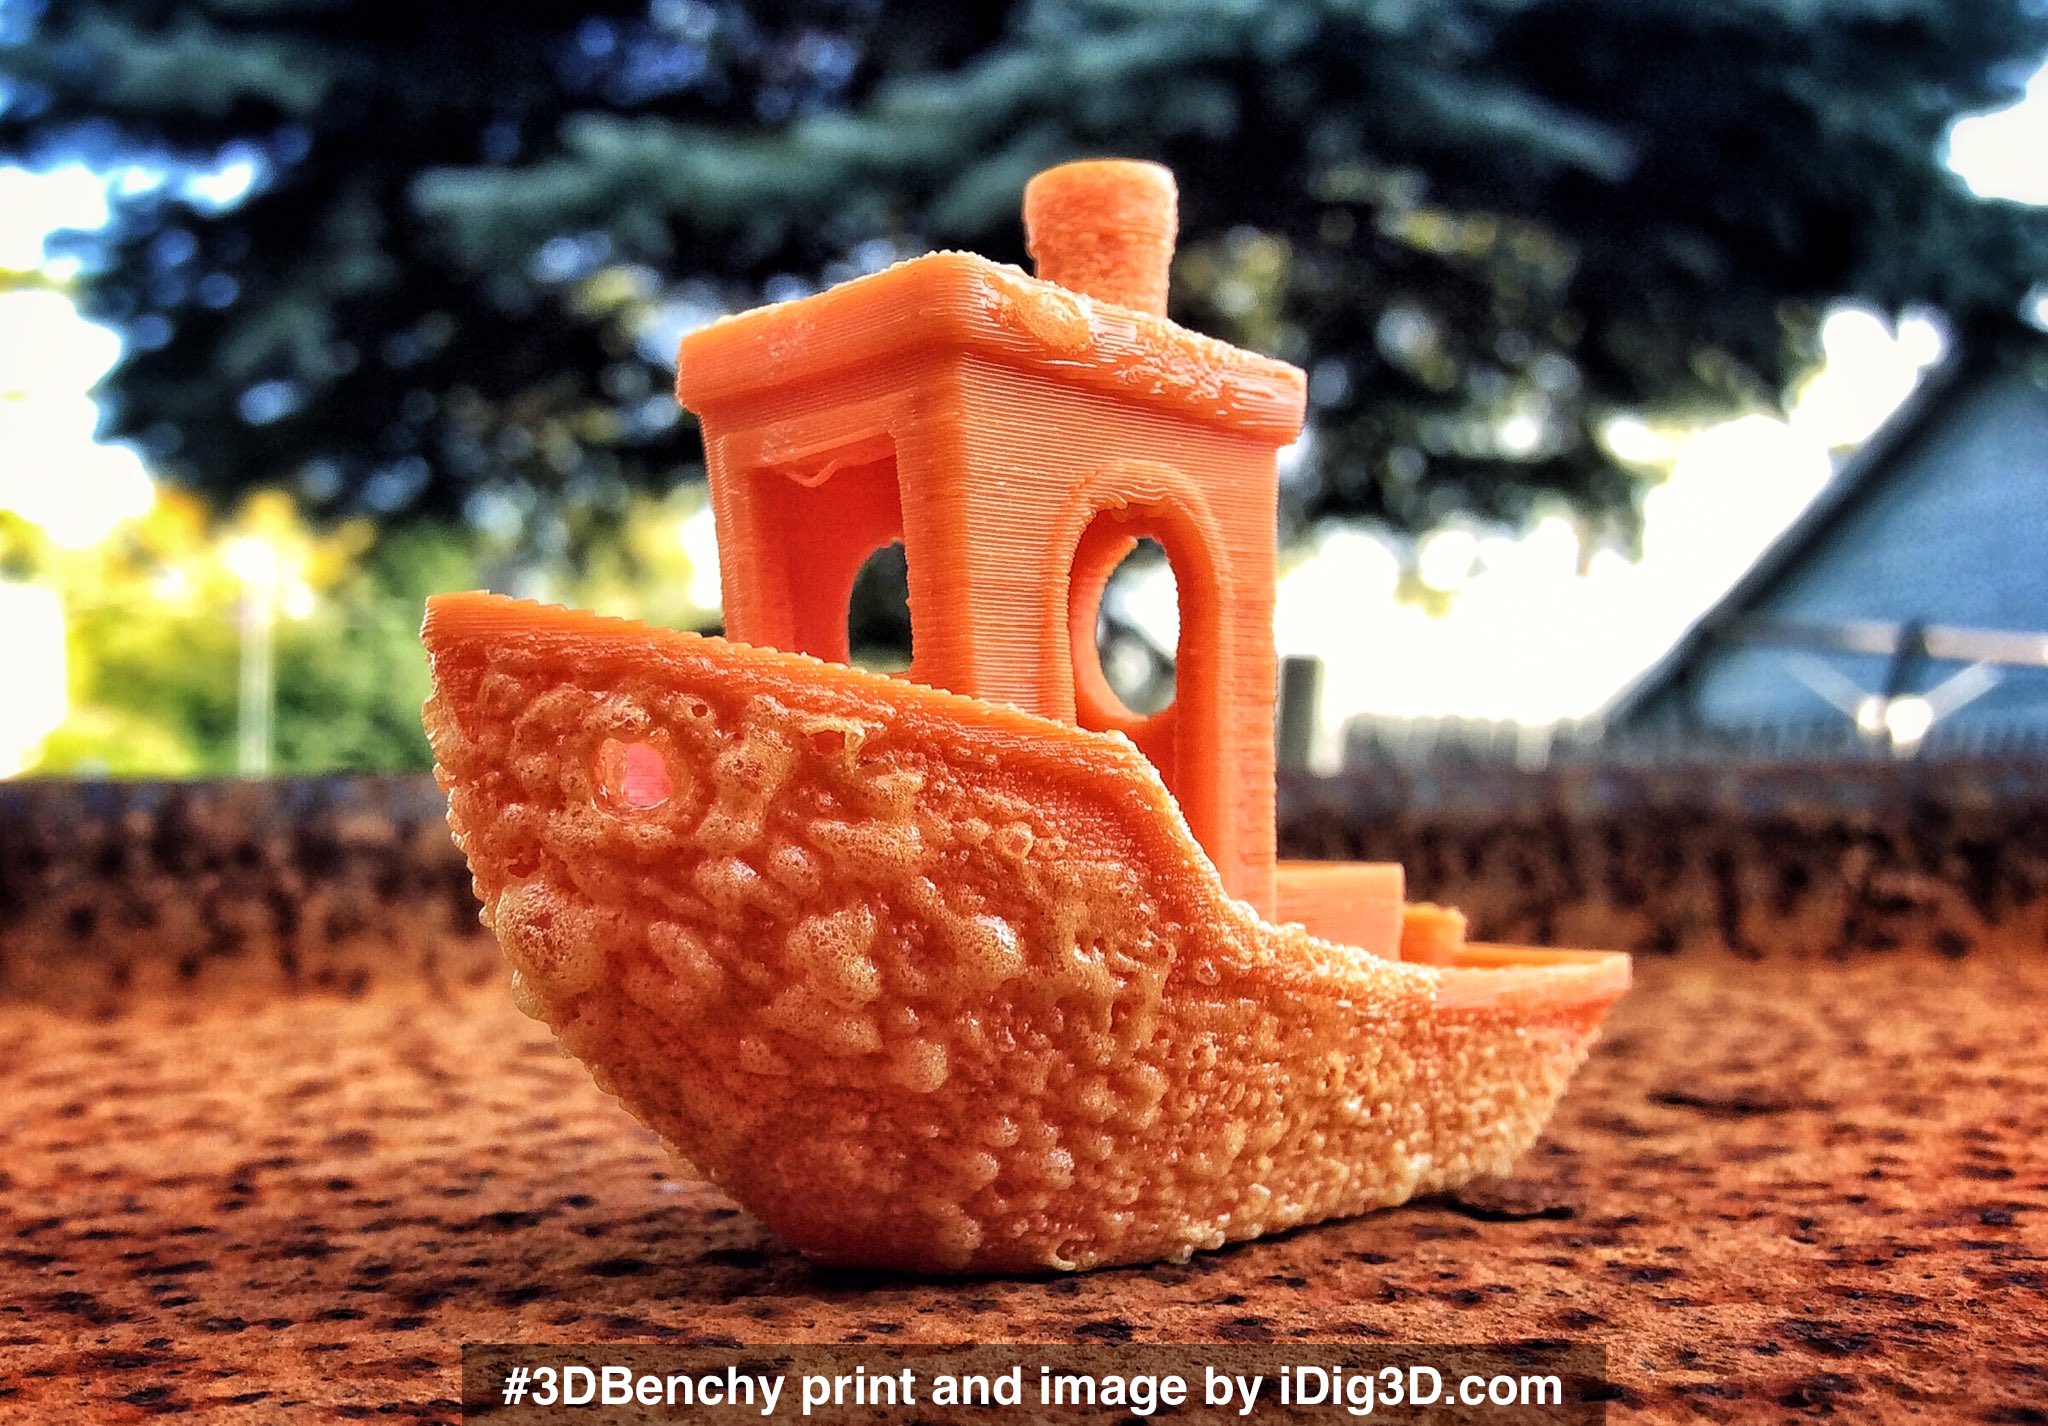 Bubbly 3D-printed surface texture #3DBenchy